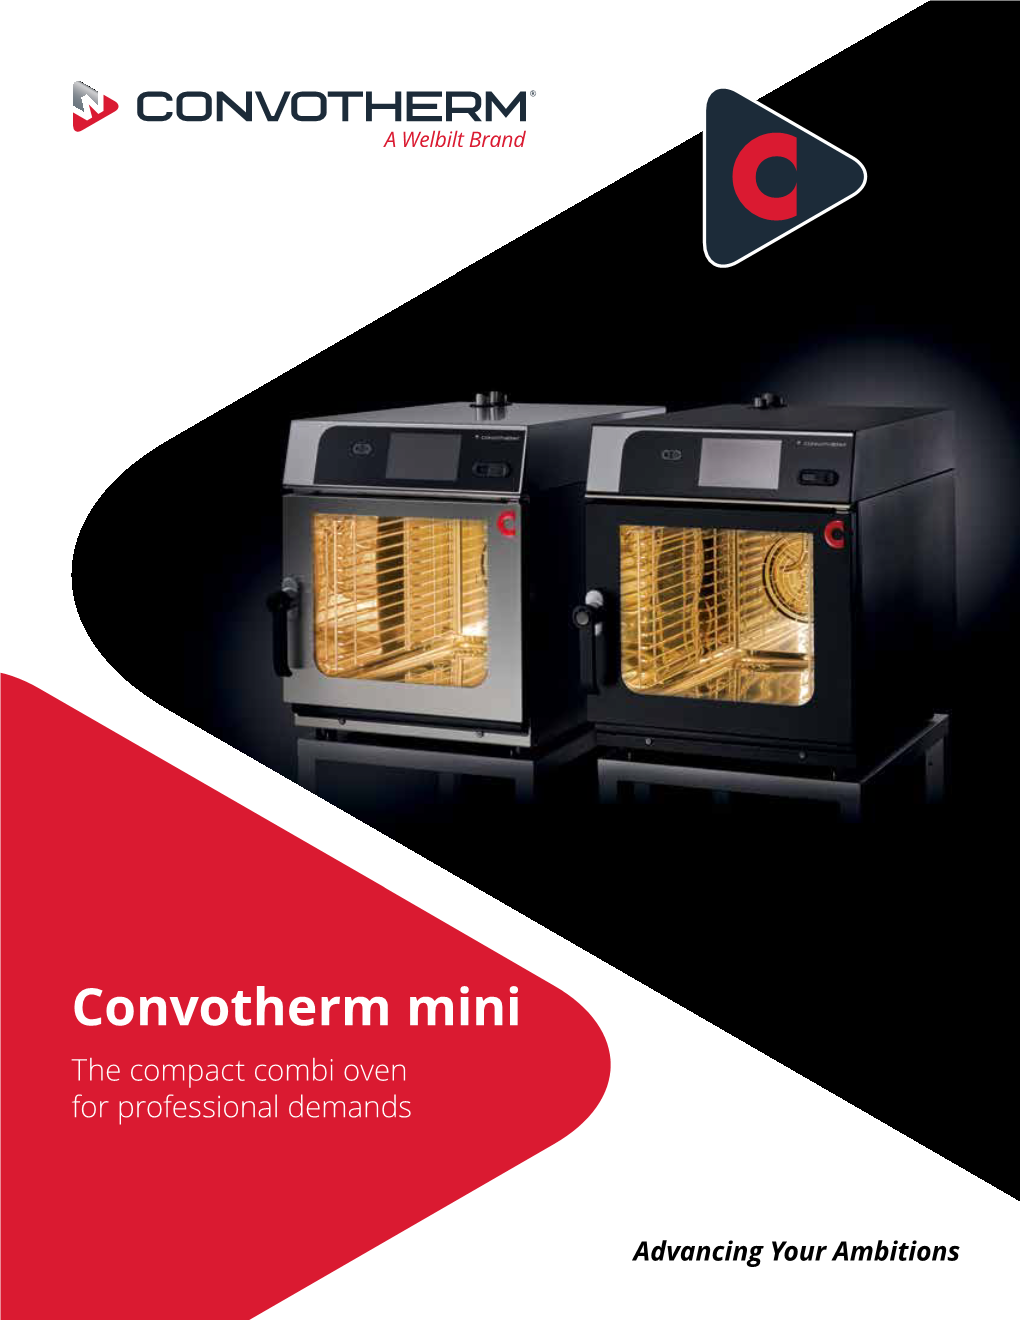 Convotherm Mini the Compact Combi Oven for Professional Demands